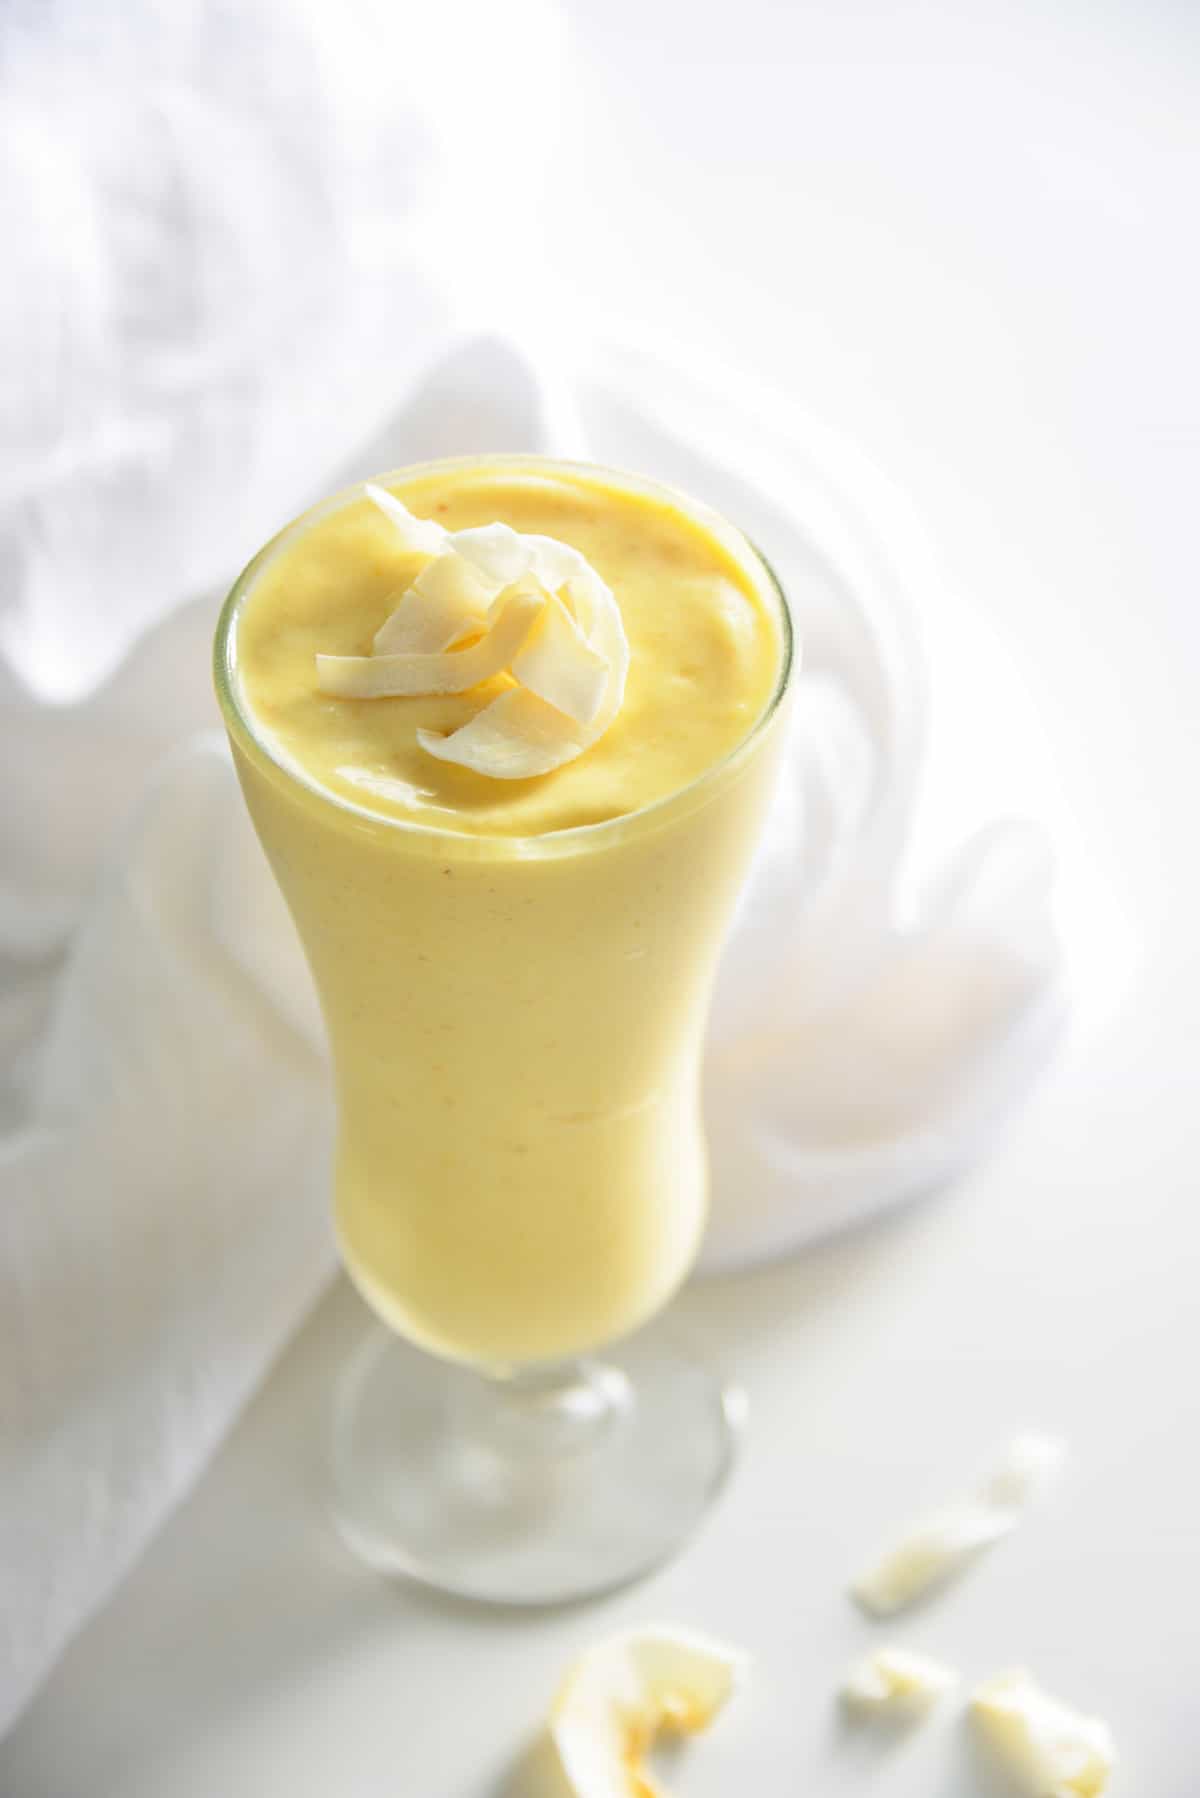 Mango pineapple smoothie topped with coconut.